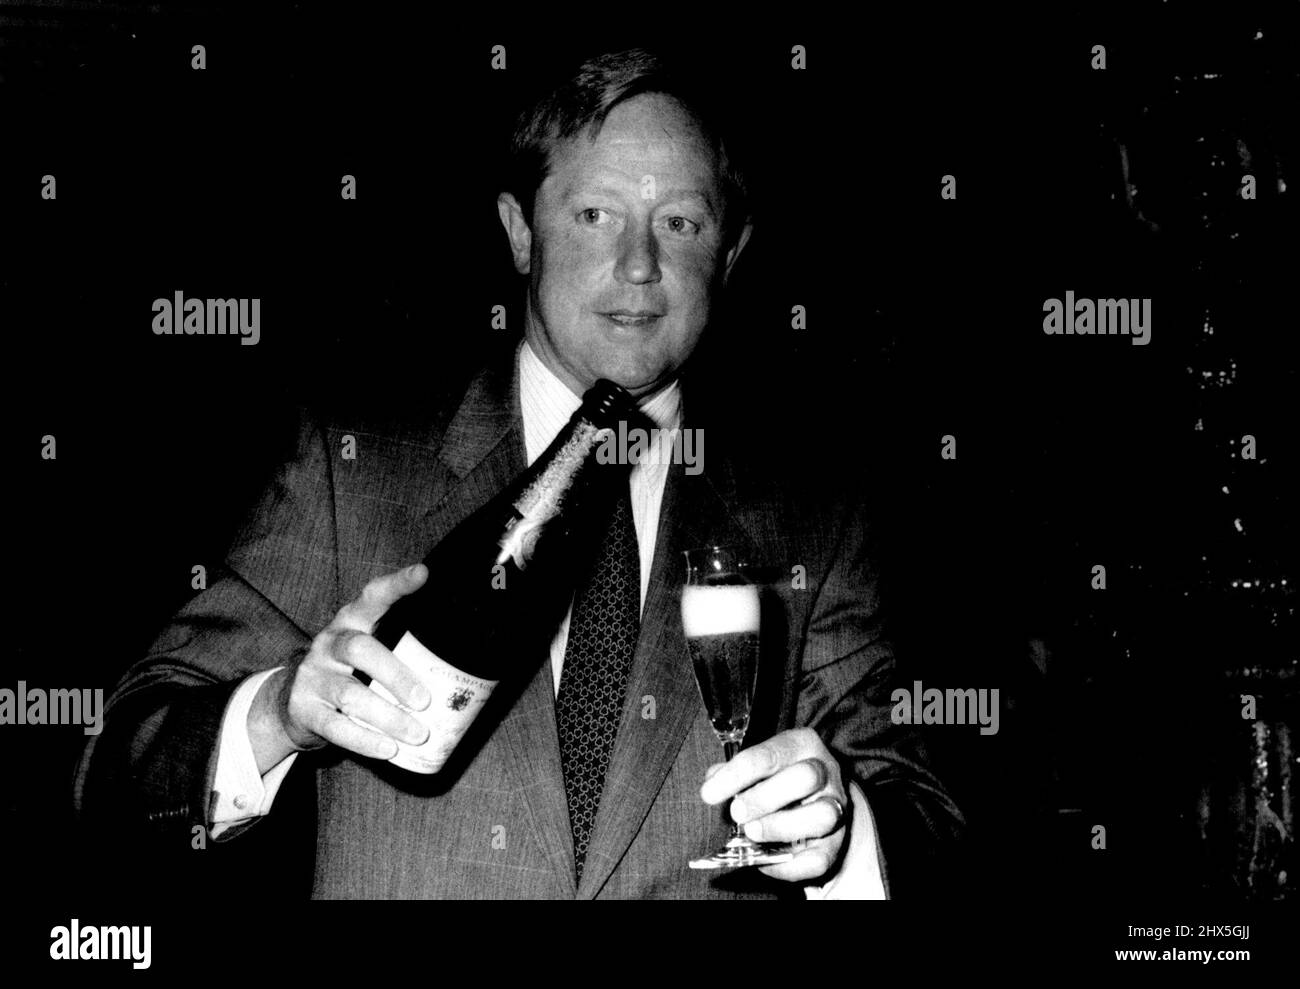 Much has been written of Sir. Winston Churchill's legendary thirst for Pol Roger Champagne. Churchill, it seems, was a marketing manager's dream: he was 'brand loyalty' personified. He professed to drink no other champagne than Pol, and reportedly quite a lot of it. Wit and eloquence is the house of Pol Roger's long suit. The present director-general, Christian Pol Roger, was in Australia last week to launch the new Pol Roger cuvee Sir. Winston Churchill. August 09, 1955. (Photo by Identity Studio Pty. Ltd.). Stock Photo